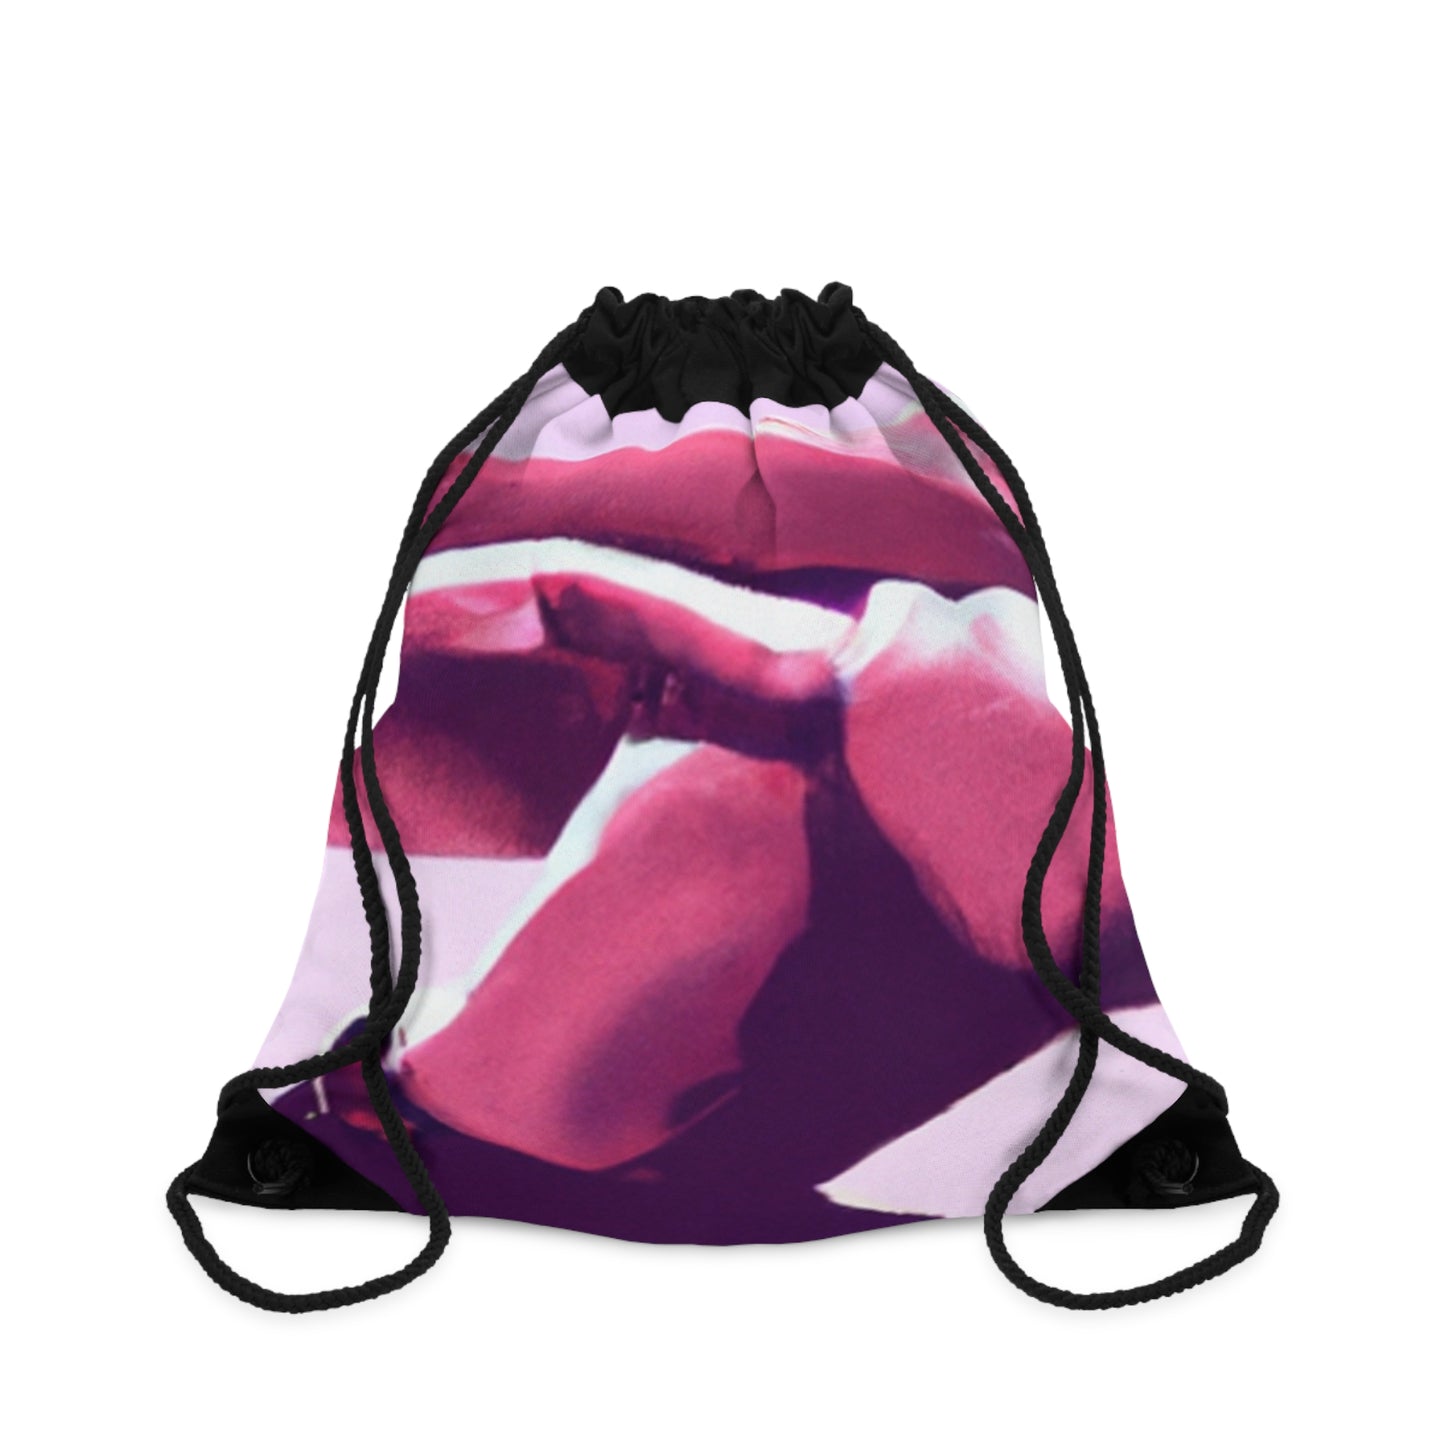 "Champion Force: A Tribute to Strength and Power" - Go Plus Drawstring Bag